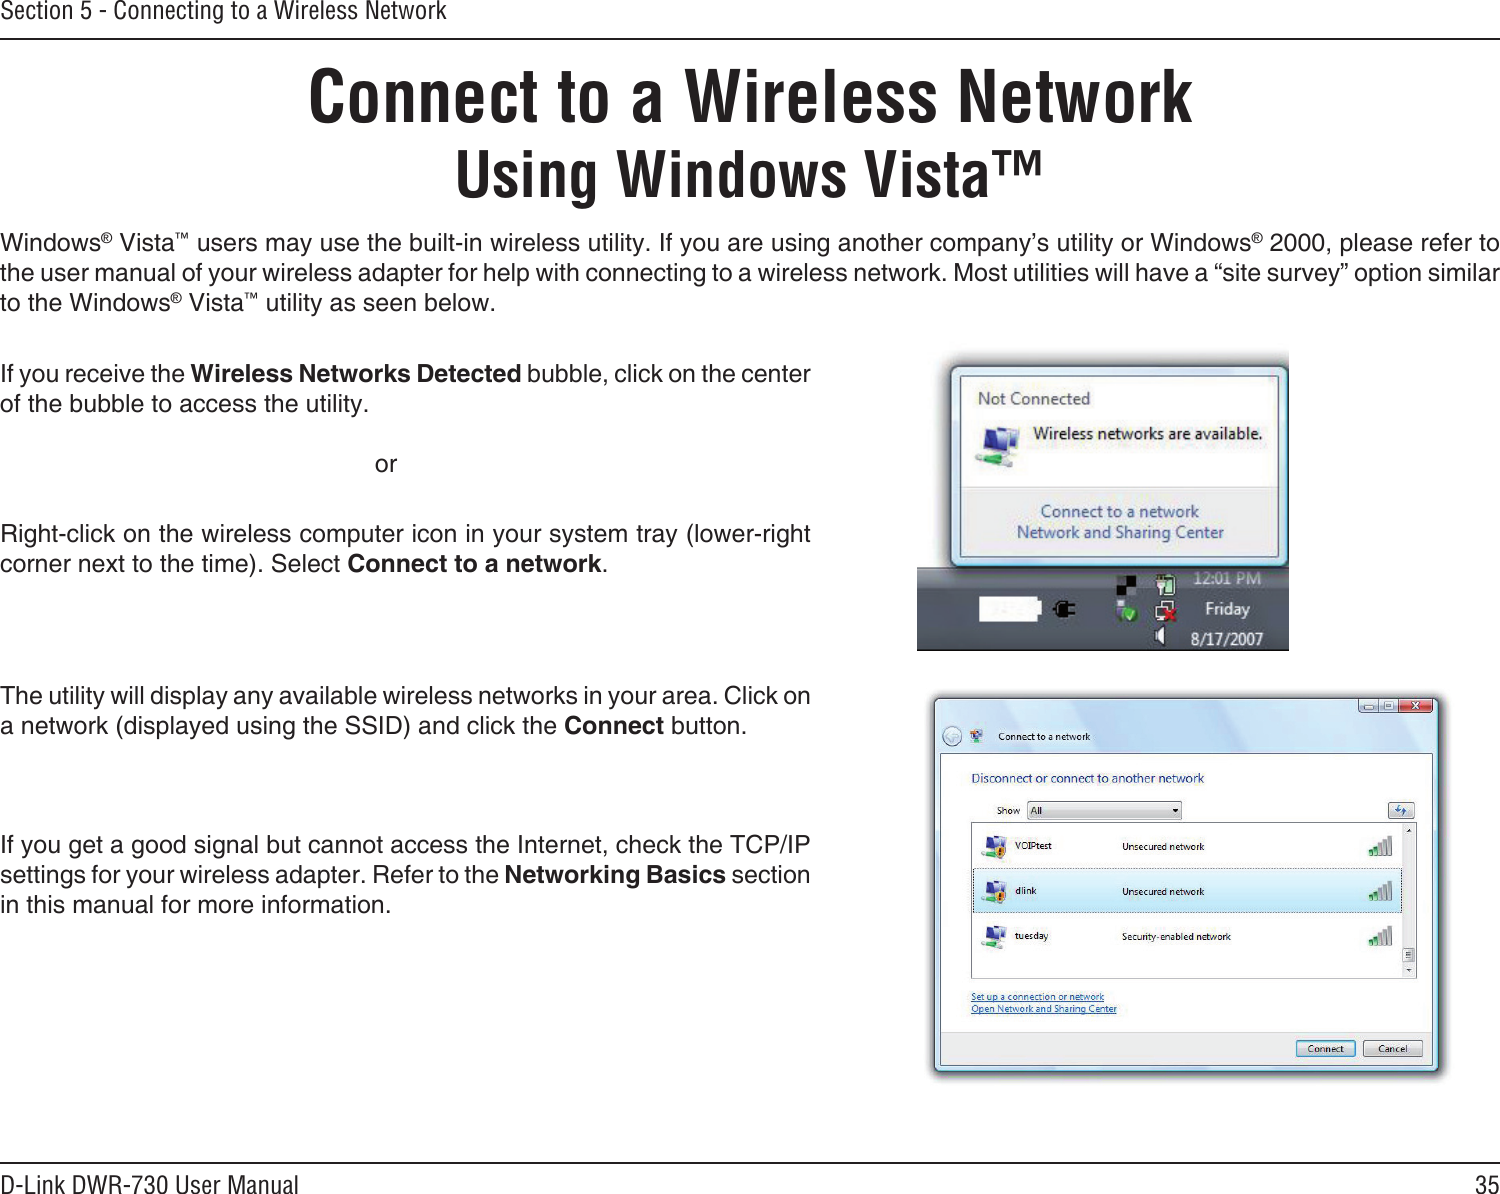 35D-Link DWR-730 User ManualSection 5 - Connecting to a Wireless NetworkConnect to a Wireless NetworkUsing Windows Vista™